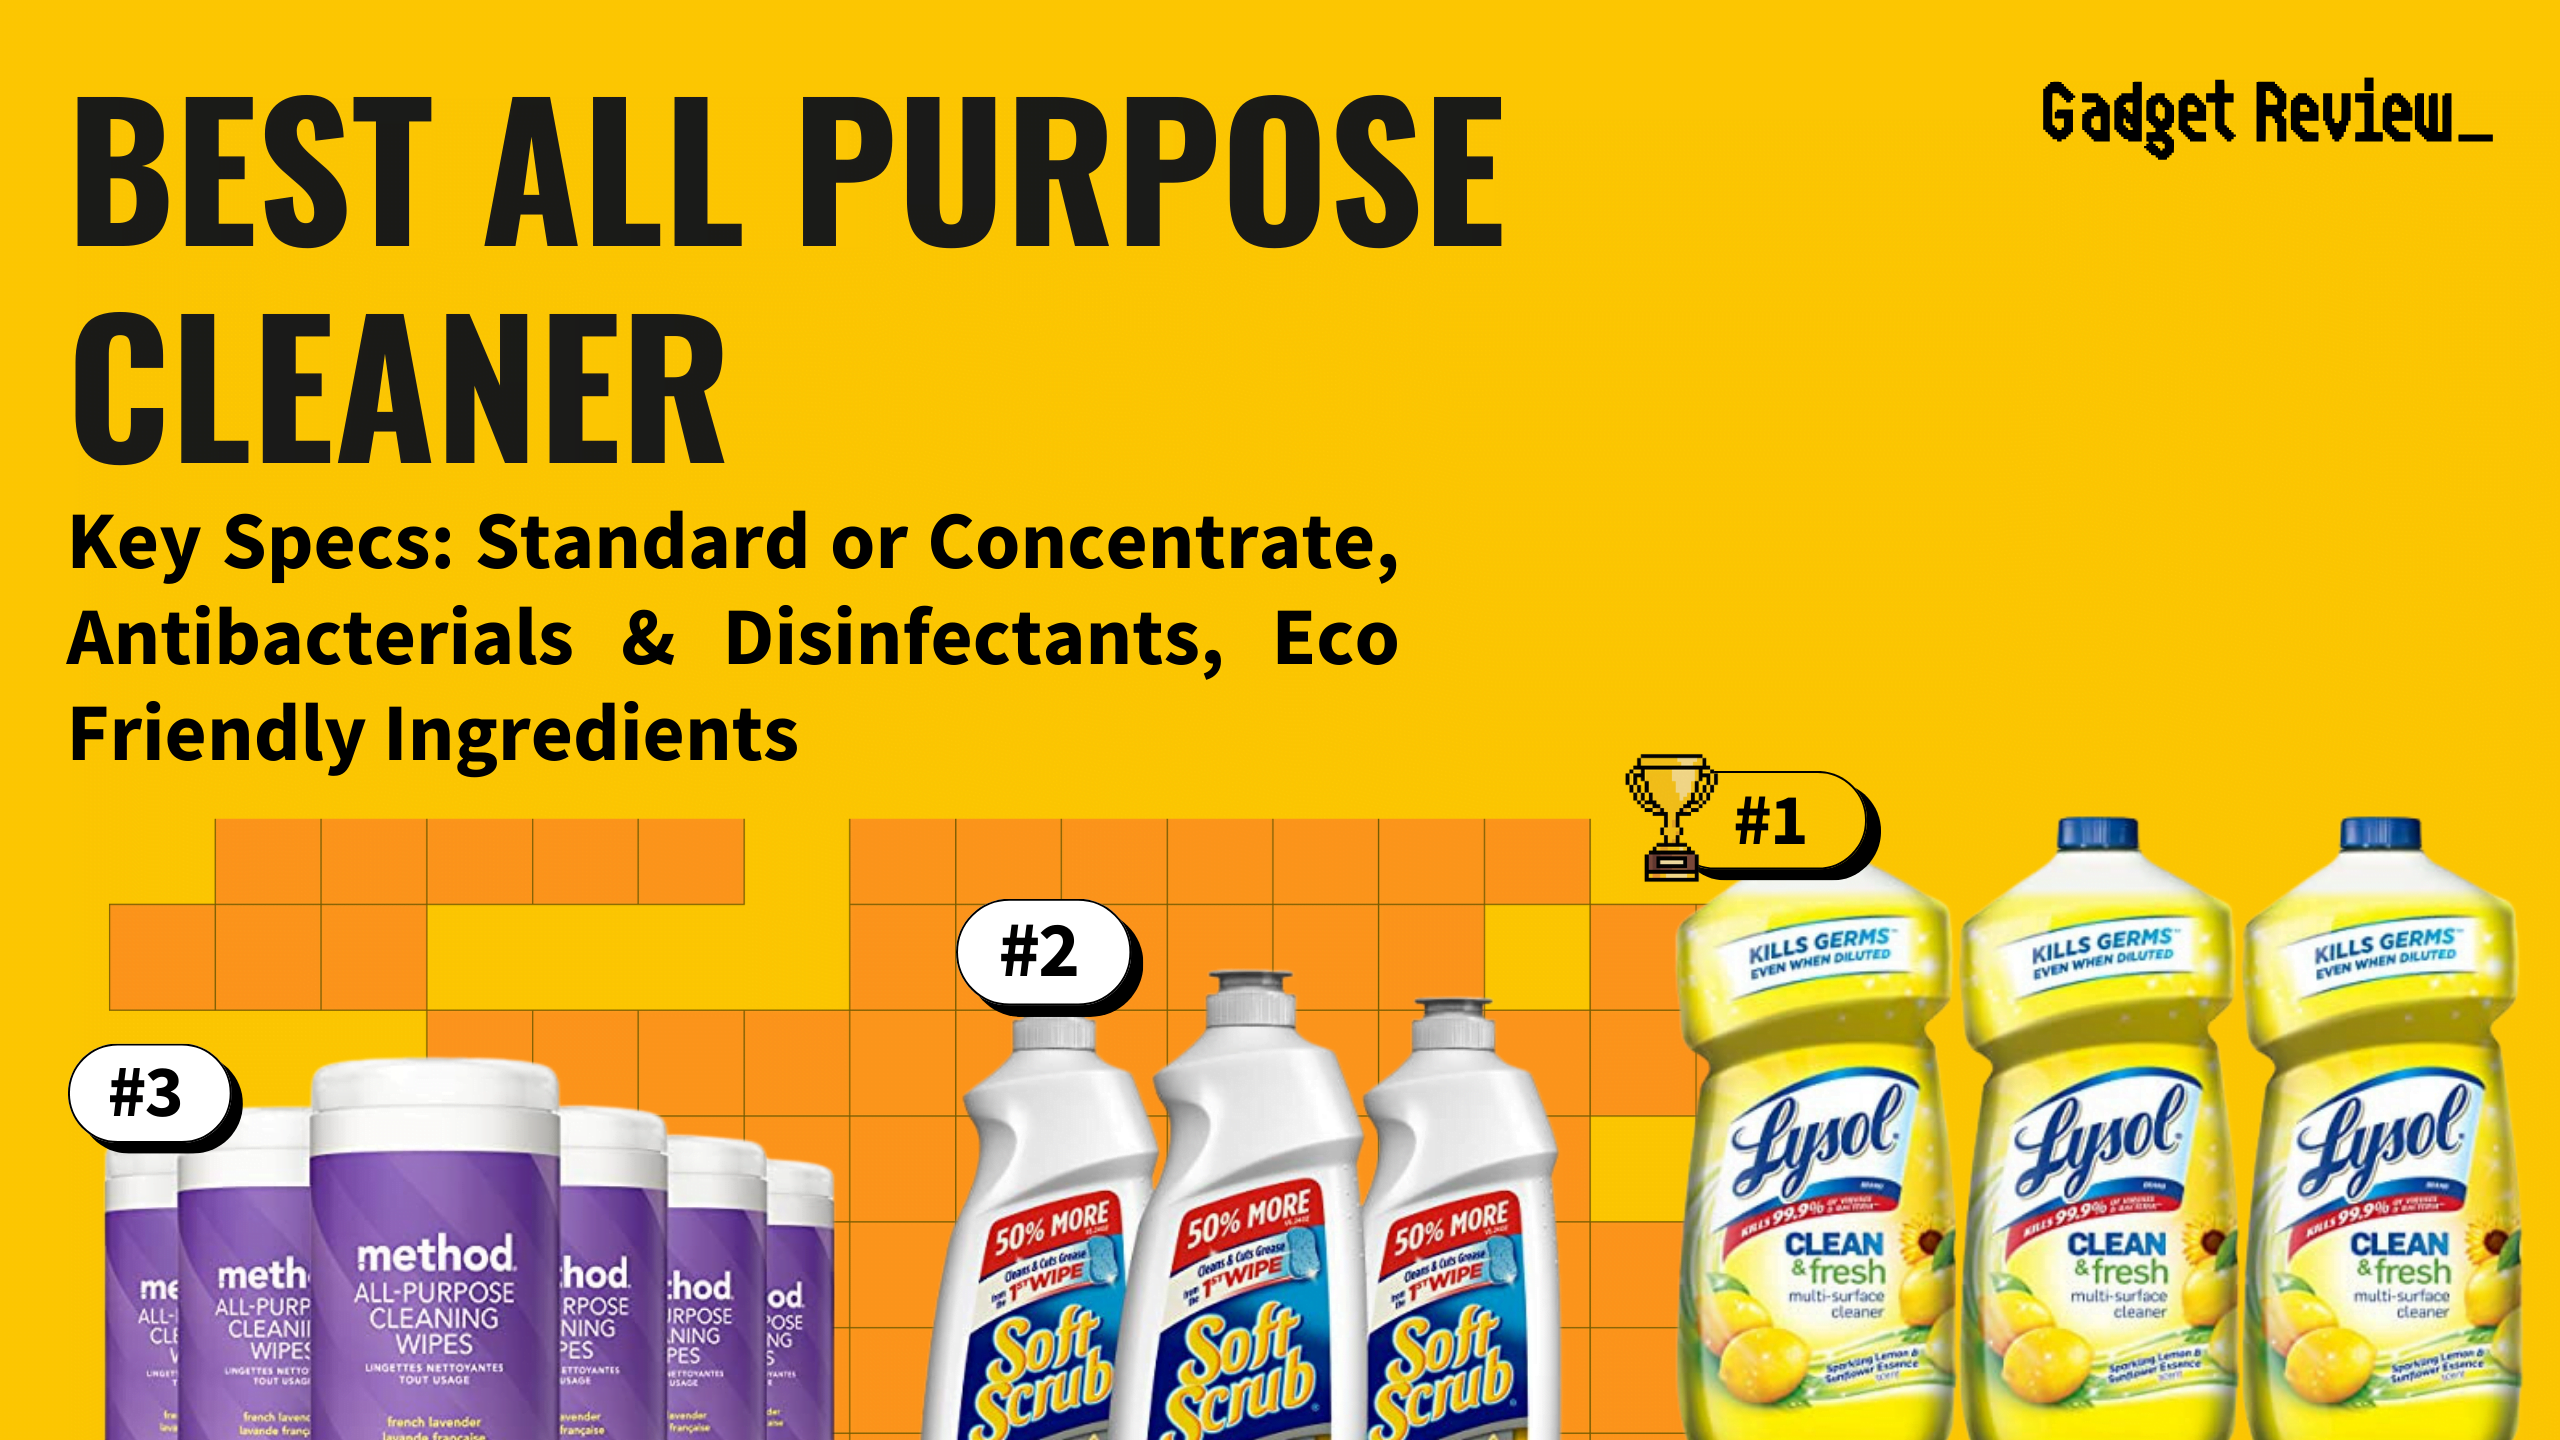 best all purpose cleaner featured image that shows the top three best kitchen product models